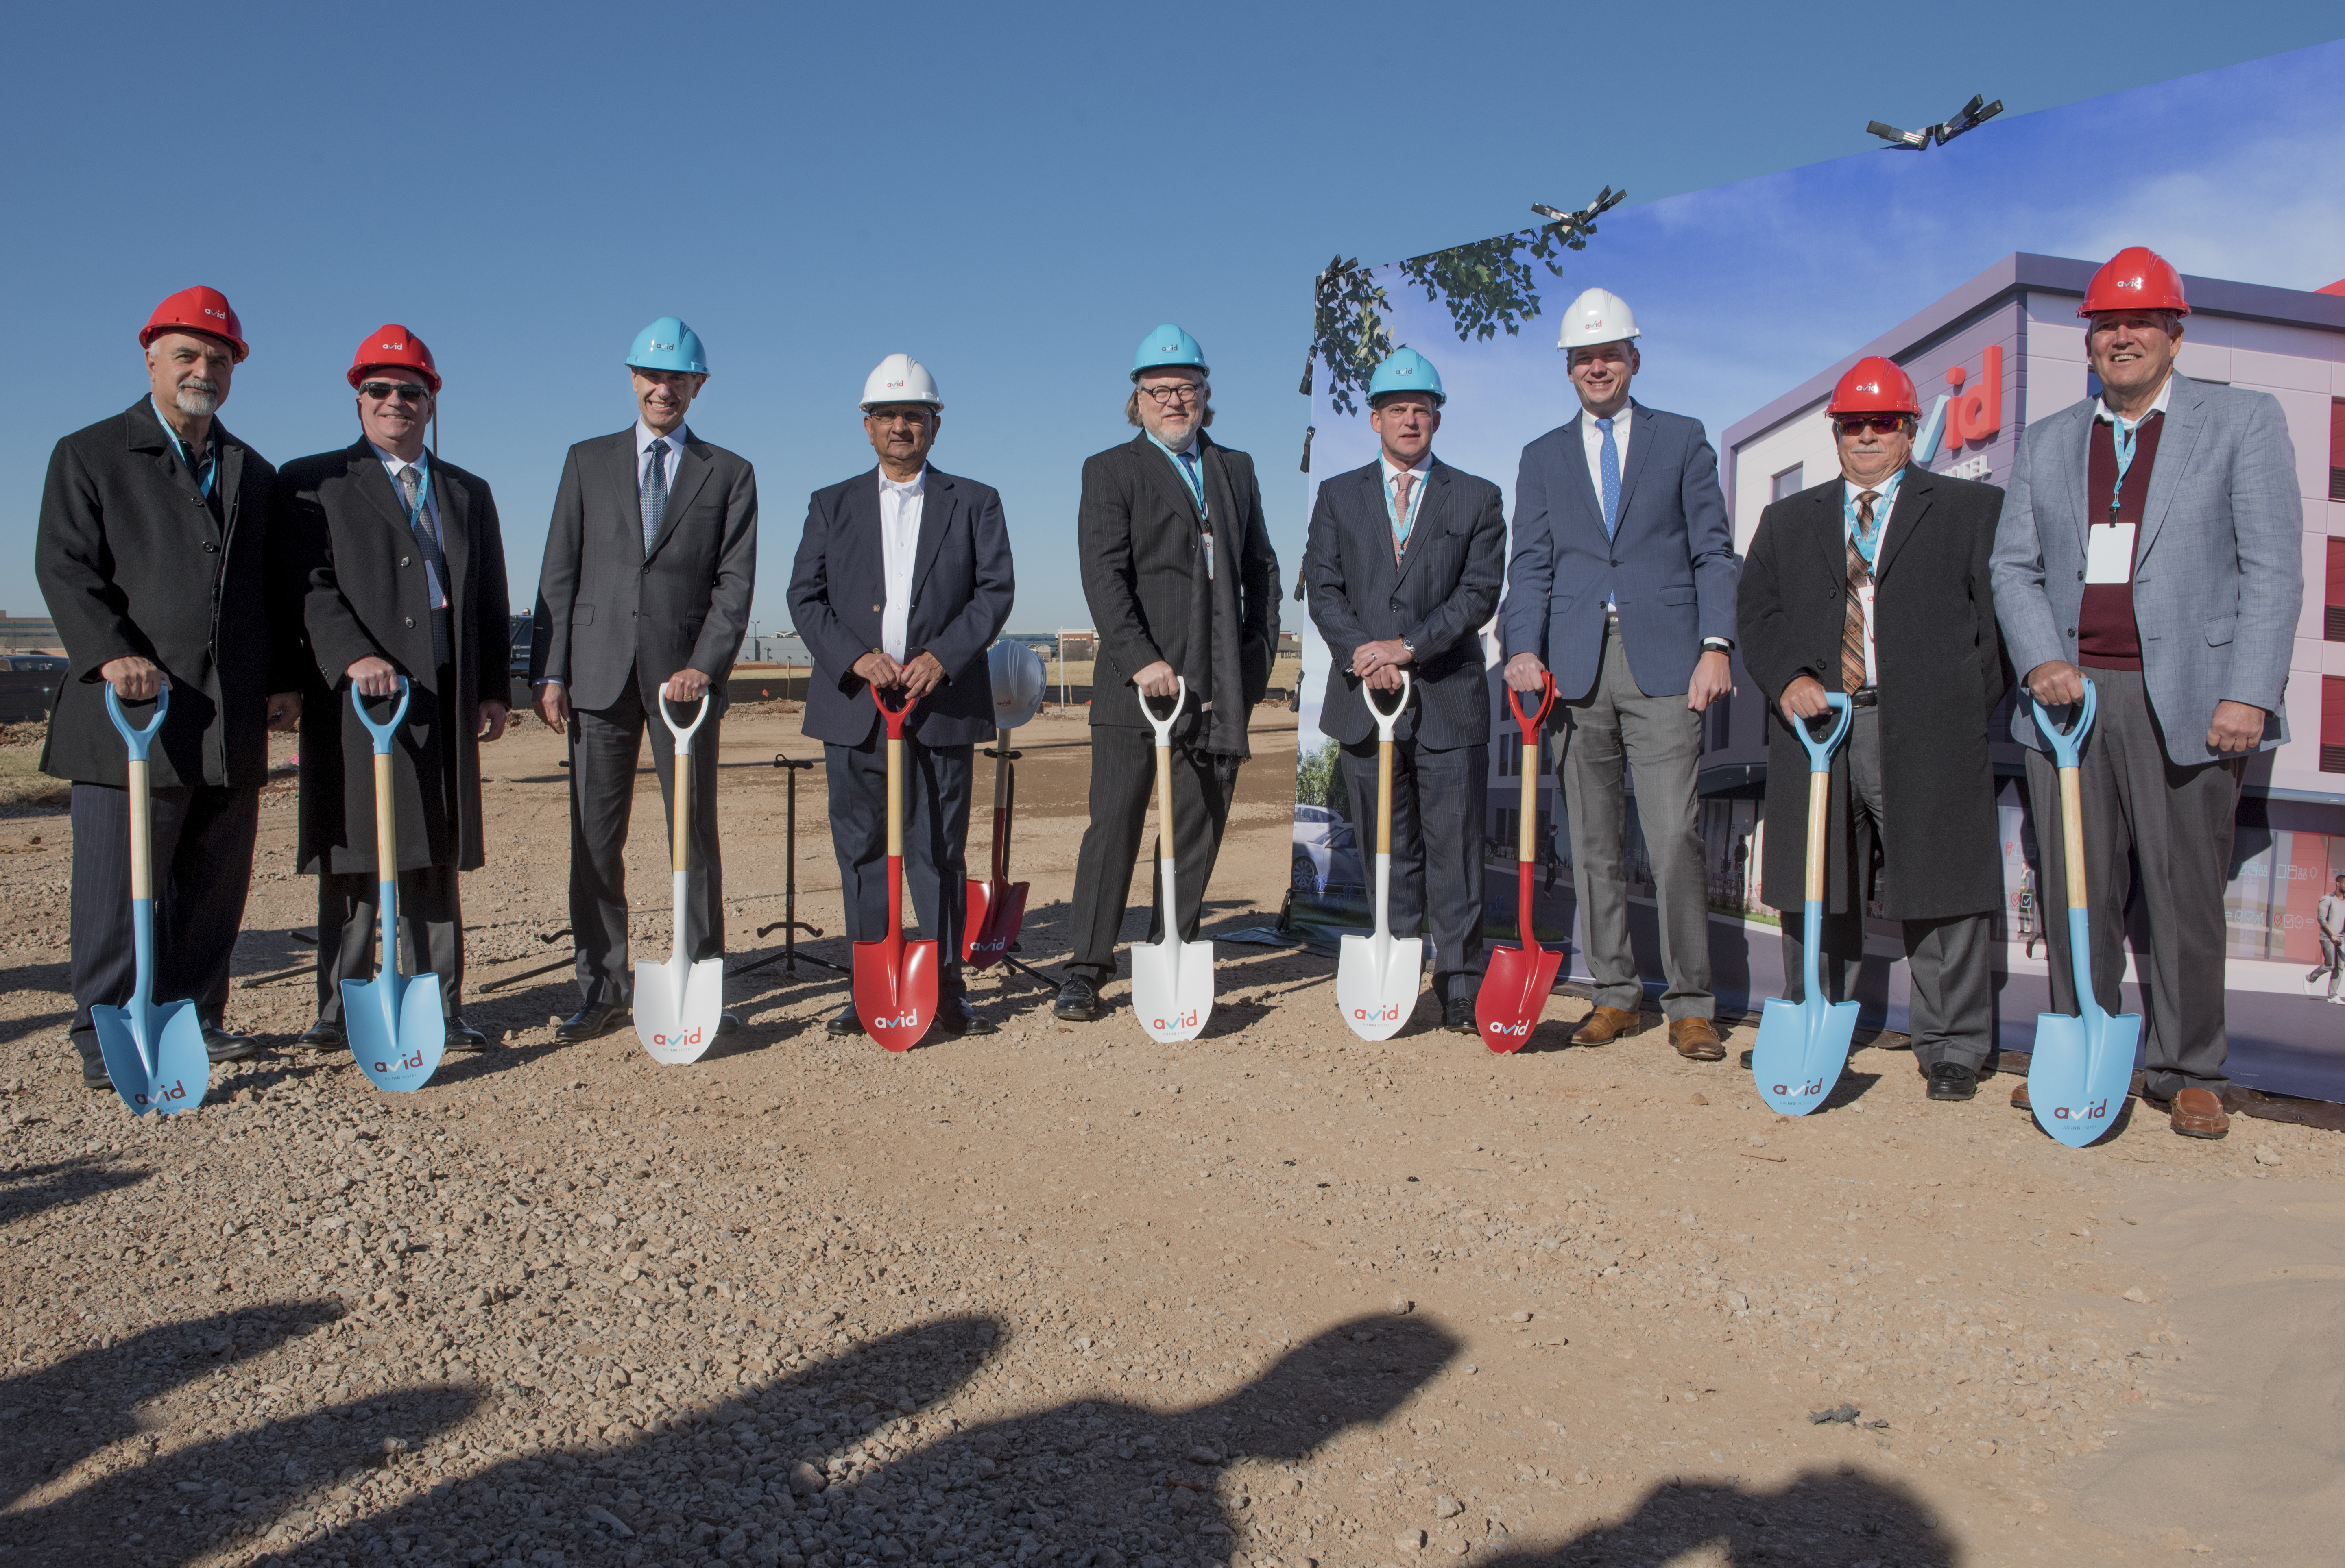 IHG and Oklahoma City-based Champion Hotels celebrate the groundbreaking of the first avid hotels with business partners and 